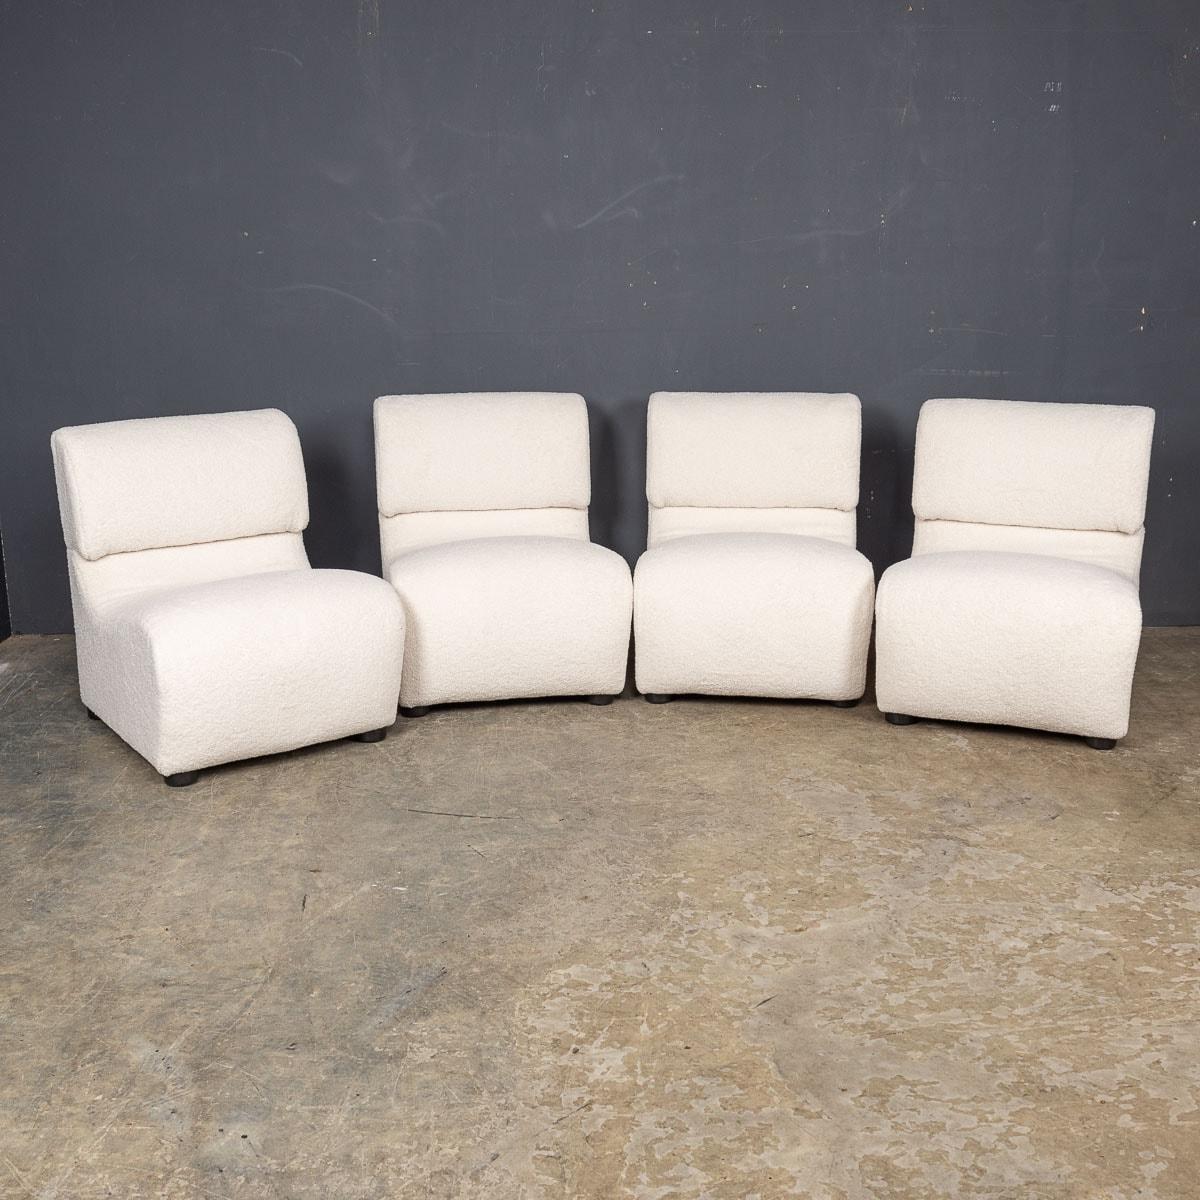 A set of four late-20th Century Italian seats, exquisitely reupholstered in lavish cream boucle fabric, offering a perfect seating solution for a TV room or home cinema.

CONDITION
In Exceptional Condition. Please refer to photographs.

SIZE
Height: